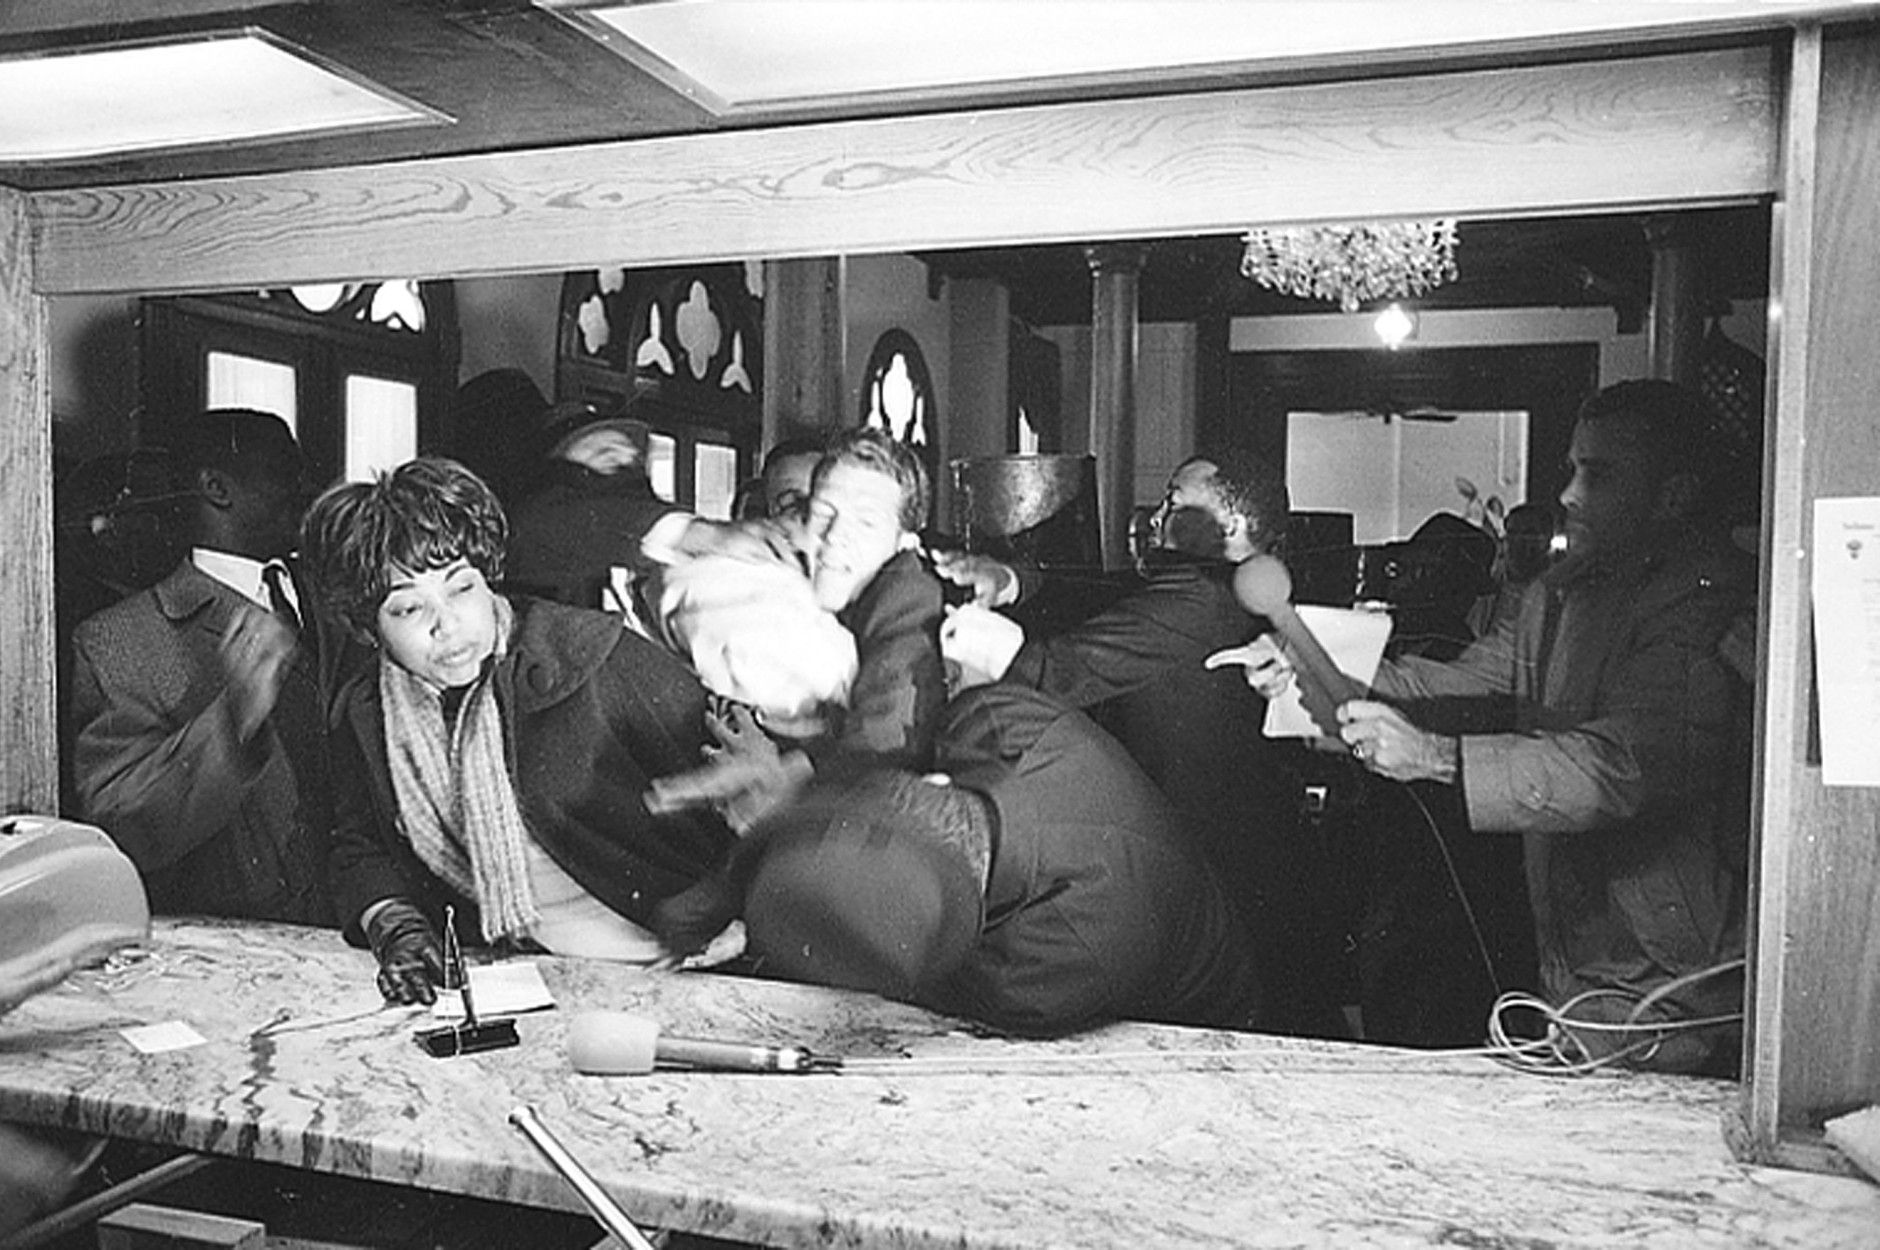 Civil rights leader Dr. Martin Luther King Jr. is attacked by States Rights Party member Jimmy Robinson as King tries to register at the Hotel Albert in Selma, Ala., Jan. 18, 1965.  The woman at left is trying to avoid the altercation.  King was not injured.  (AP Photo/Horace Cort)